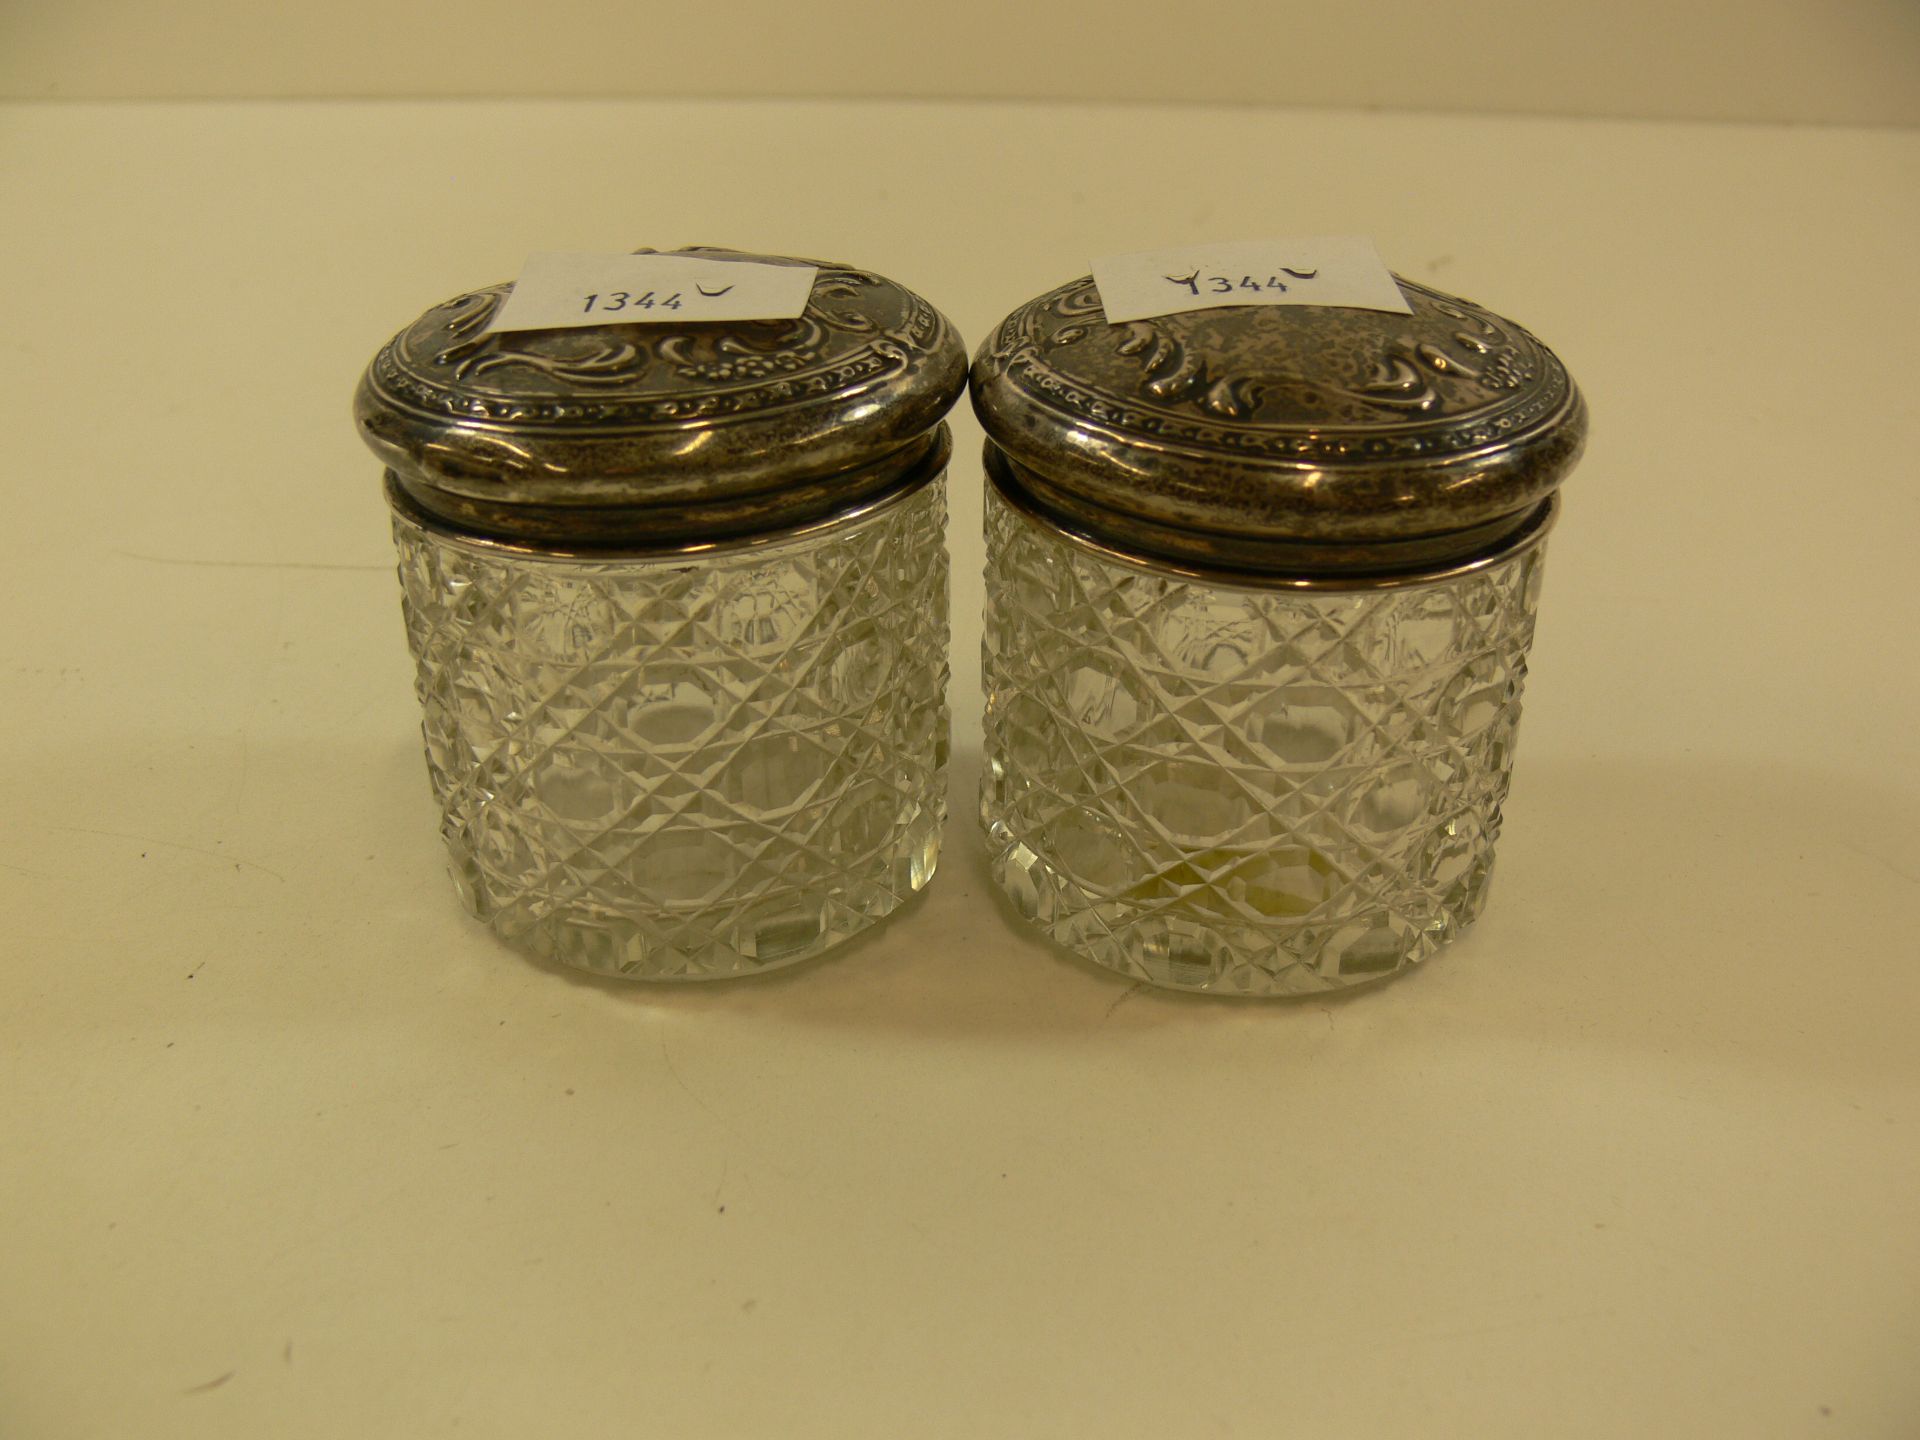 Two hallmarked silver top glass jars (tops 20g approx) (2) (est £25-£50)